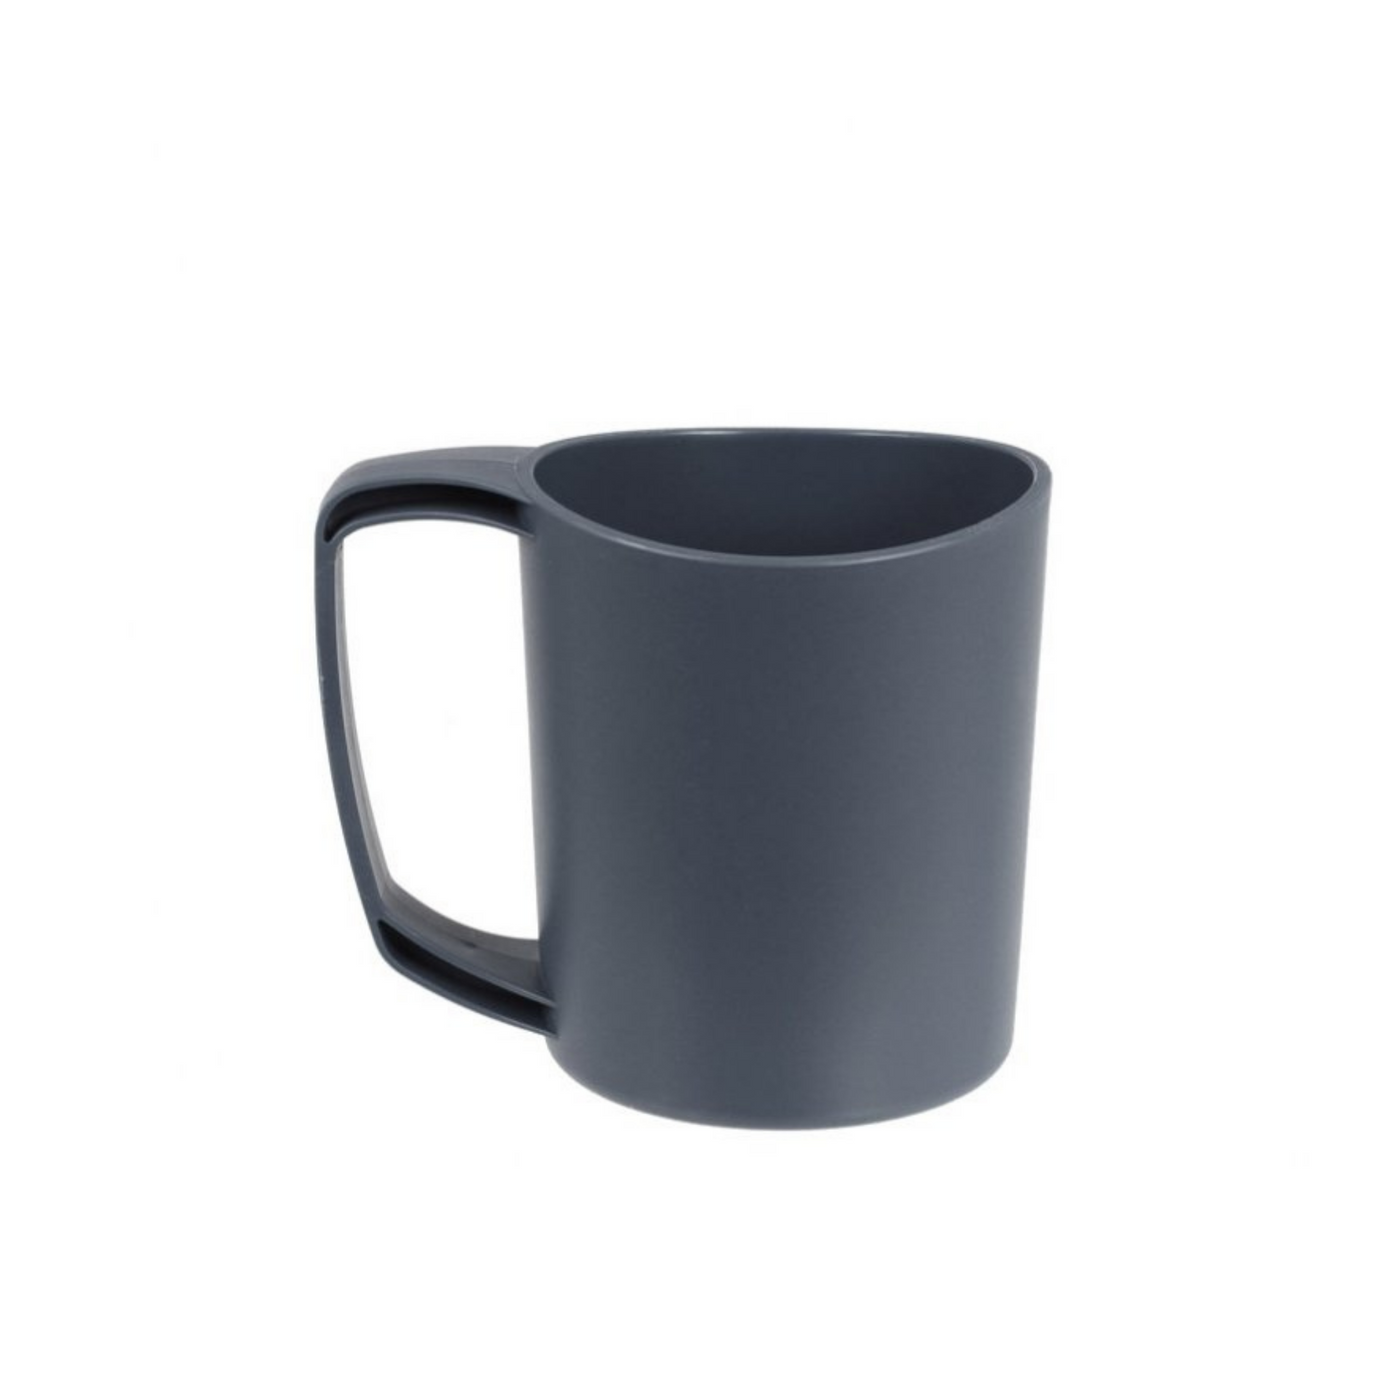 Lifeventure Ellipse Mug | Camping and Hiking Cookware | Further Faster Christchurch NZ #graphite